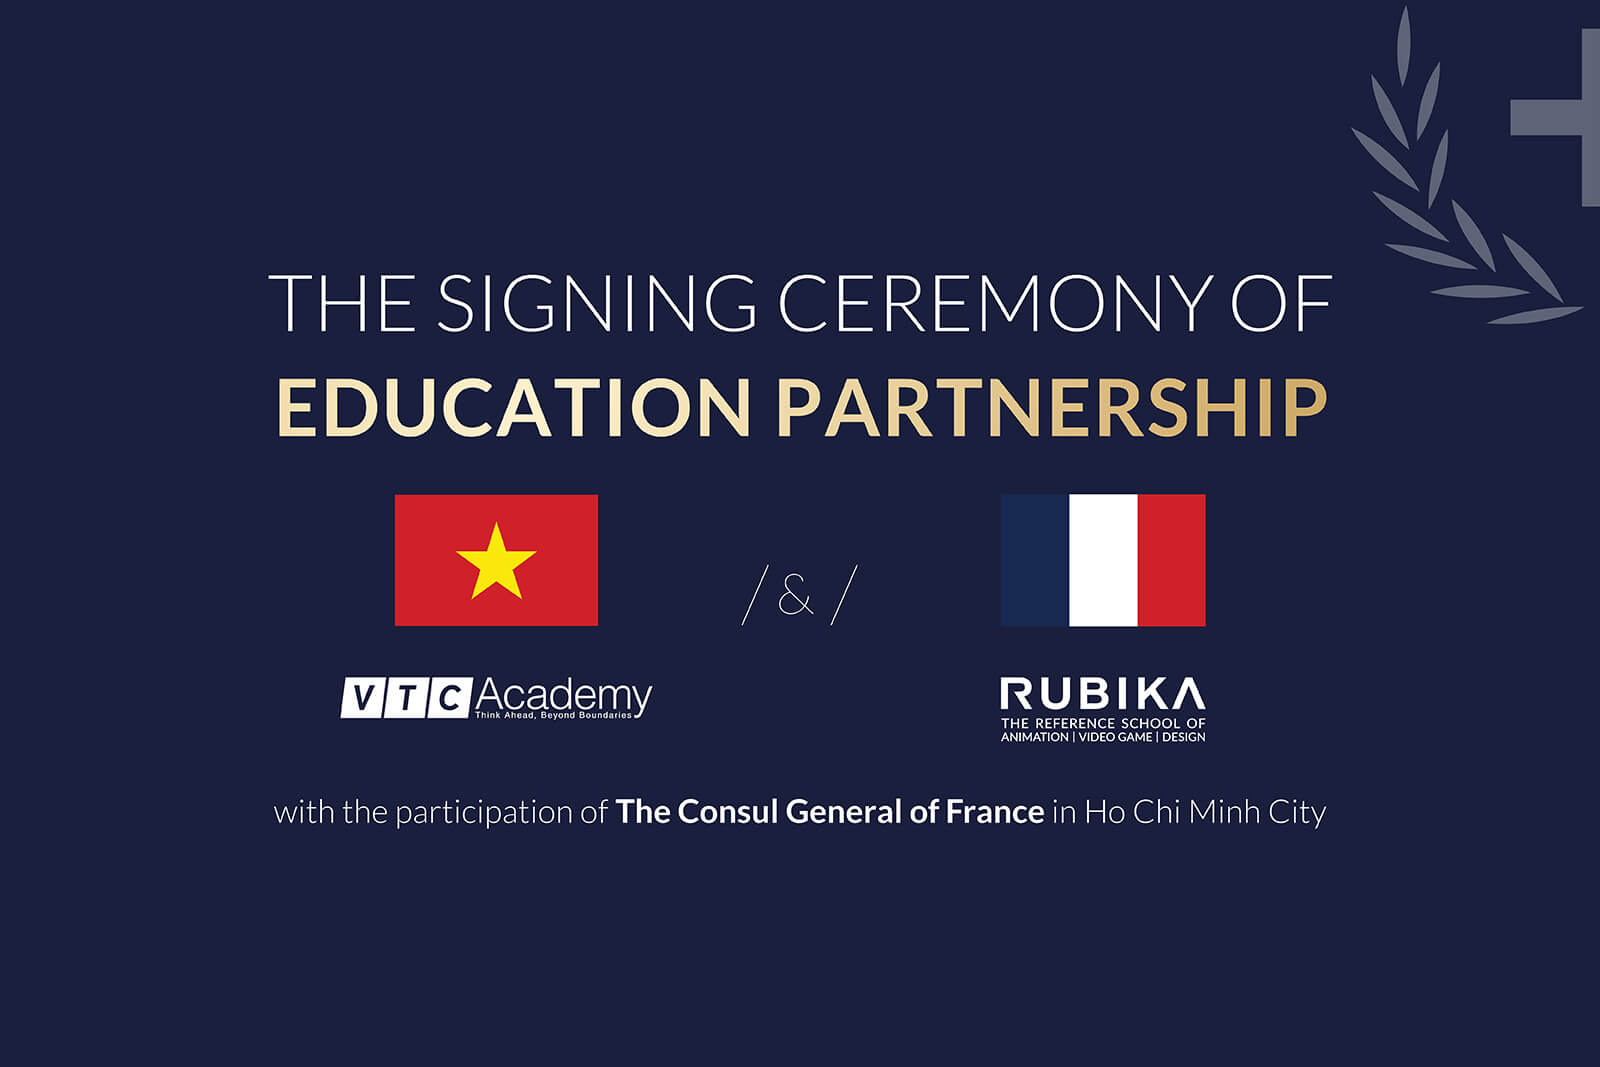 The signing ceremony of the education partnership between VTC Academy and RUBIKA (France)